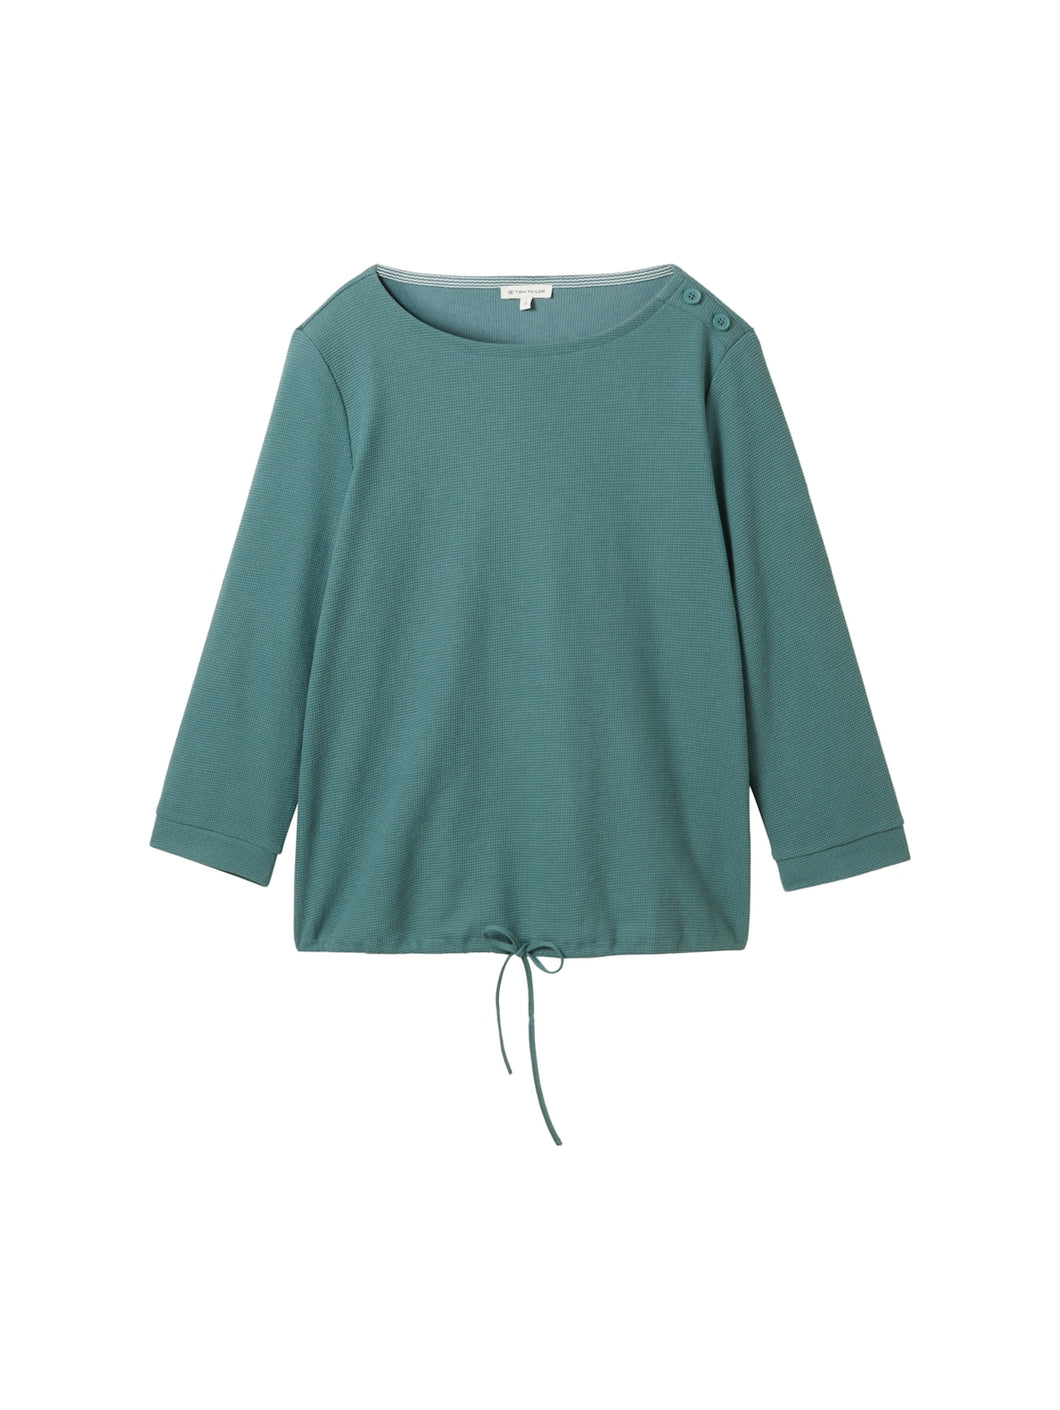 TOM TAILOR T-SHIRT WITH BUTTONS sea pine green